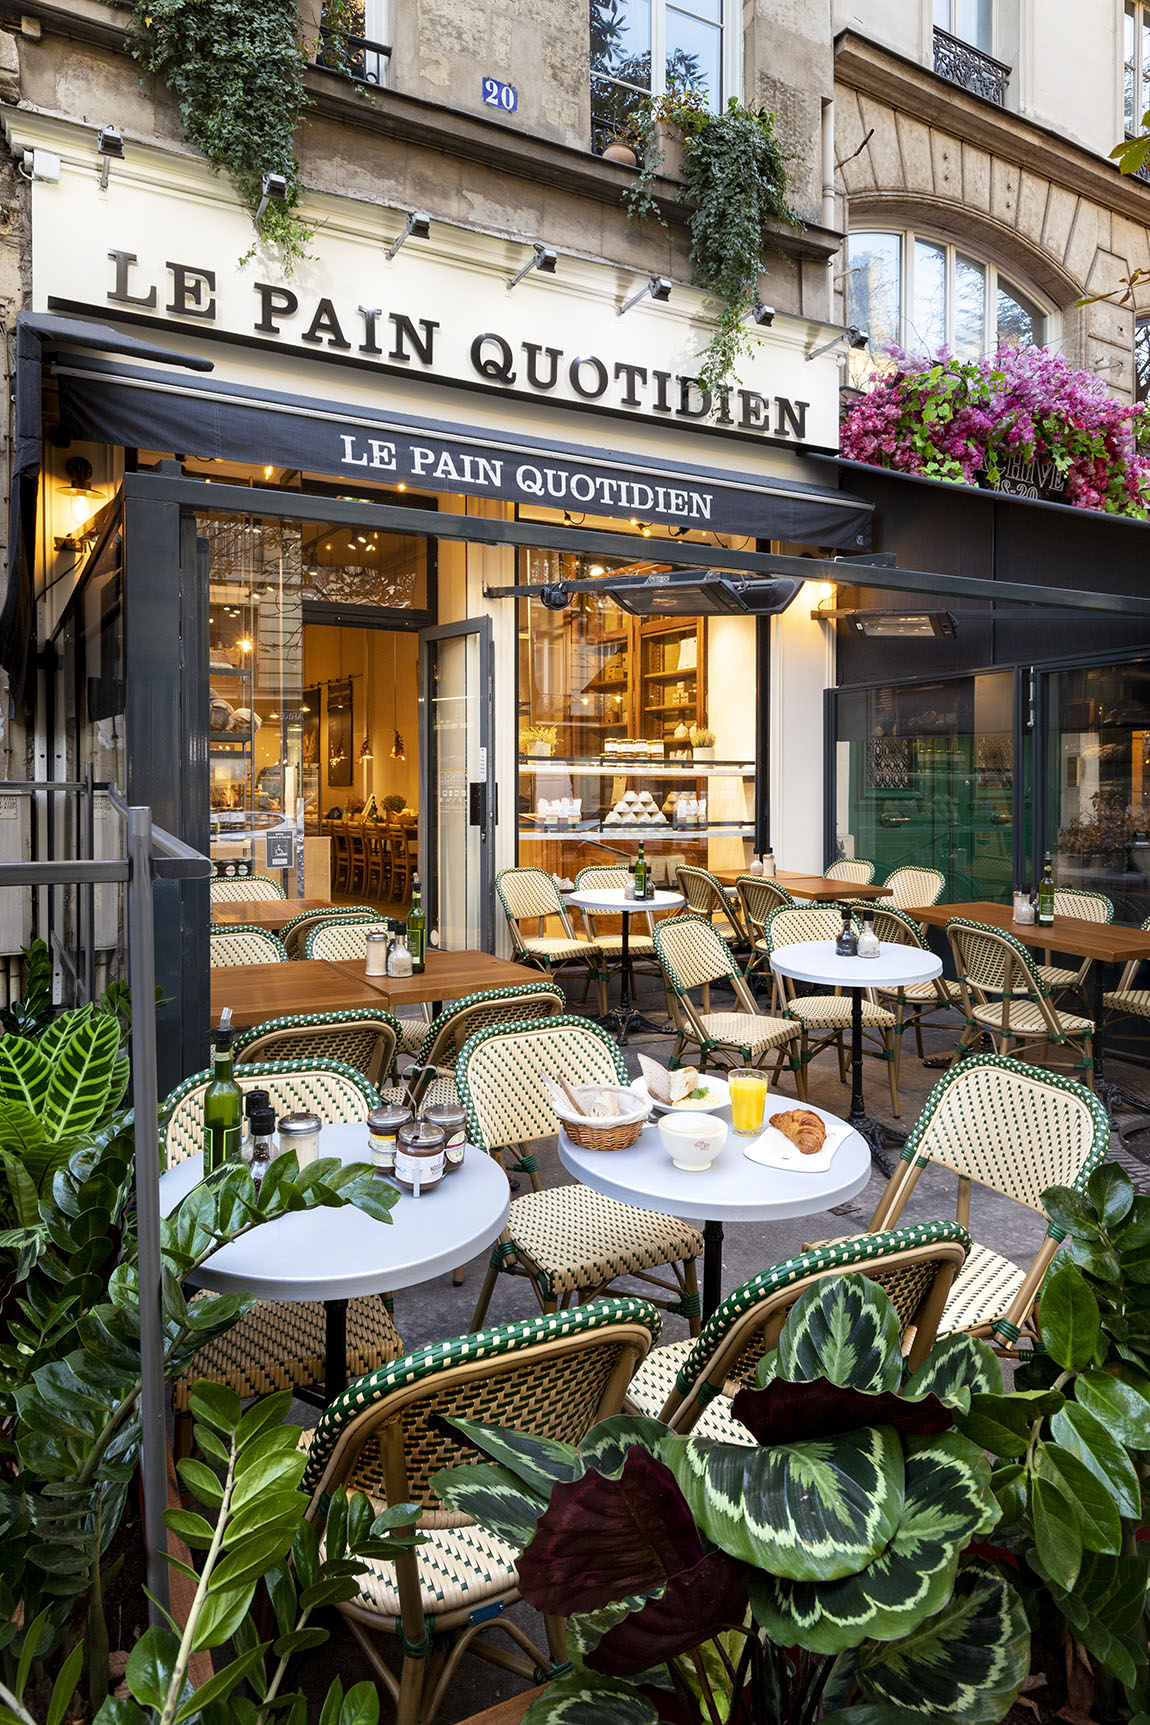 Le Pain Quotidien: Merging authenticity, conviviality and sustainability